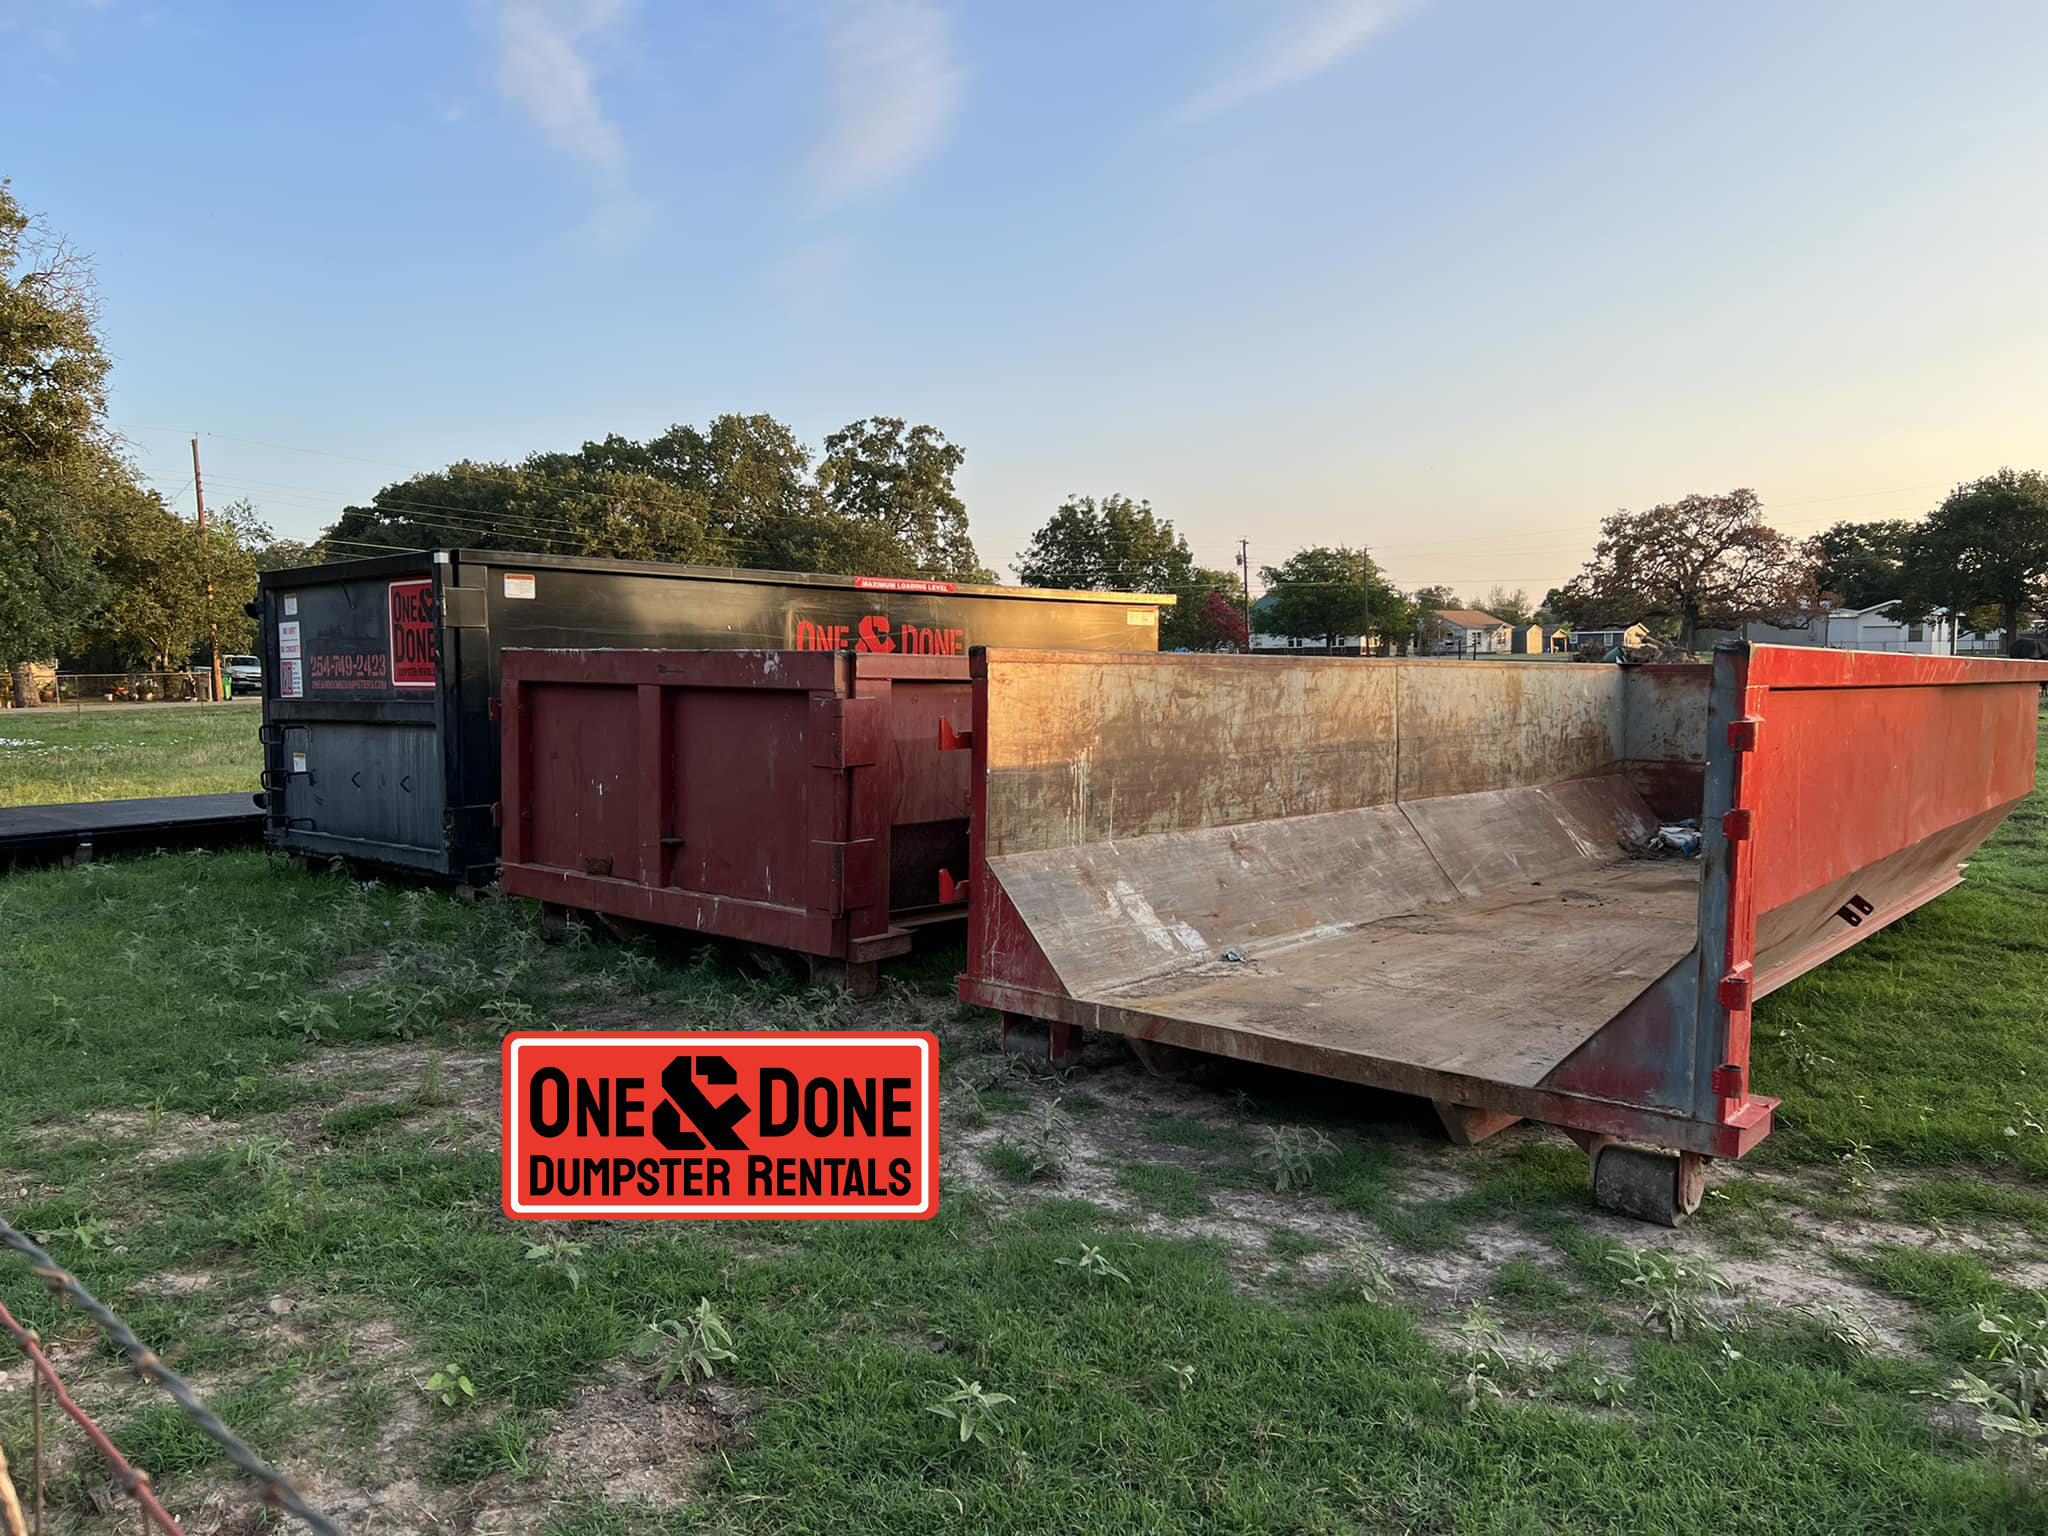 Small Dumpster Rental One and Done Dumpster Rentals Marlin TX Homeowners Use for Yard Waste